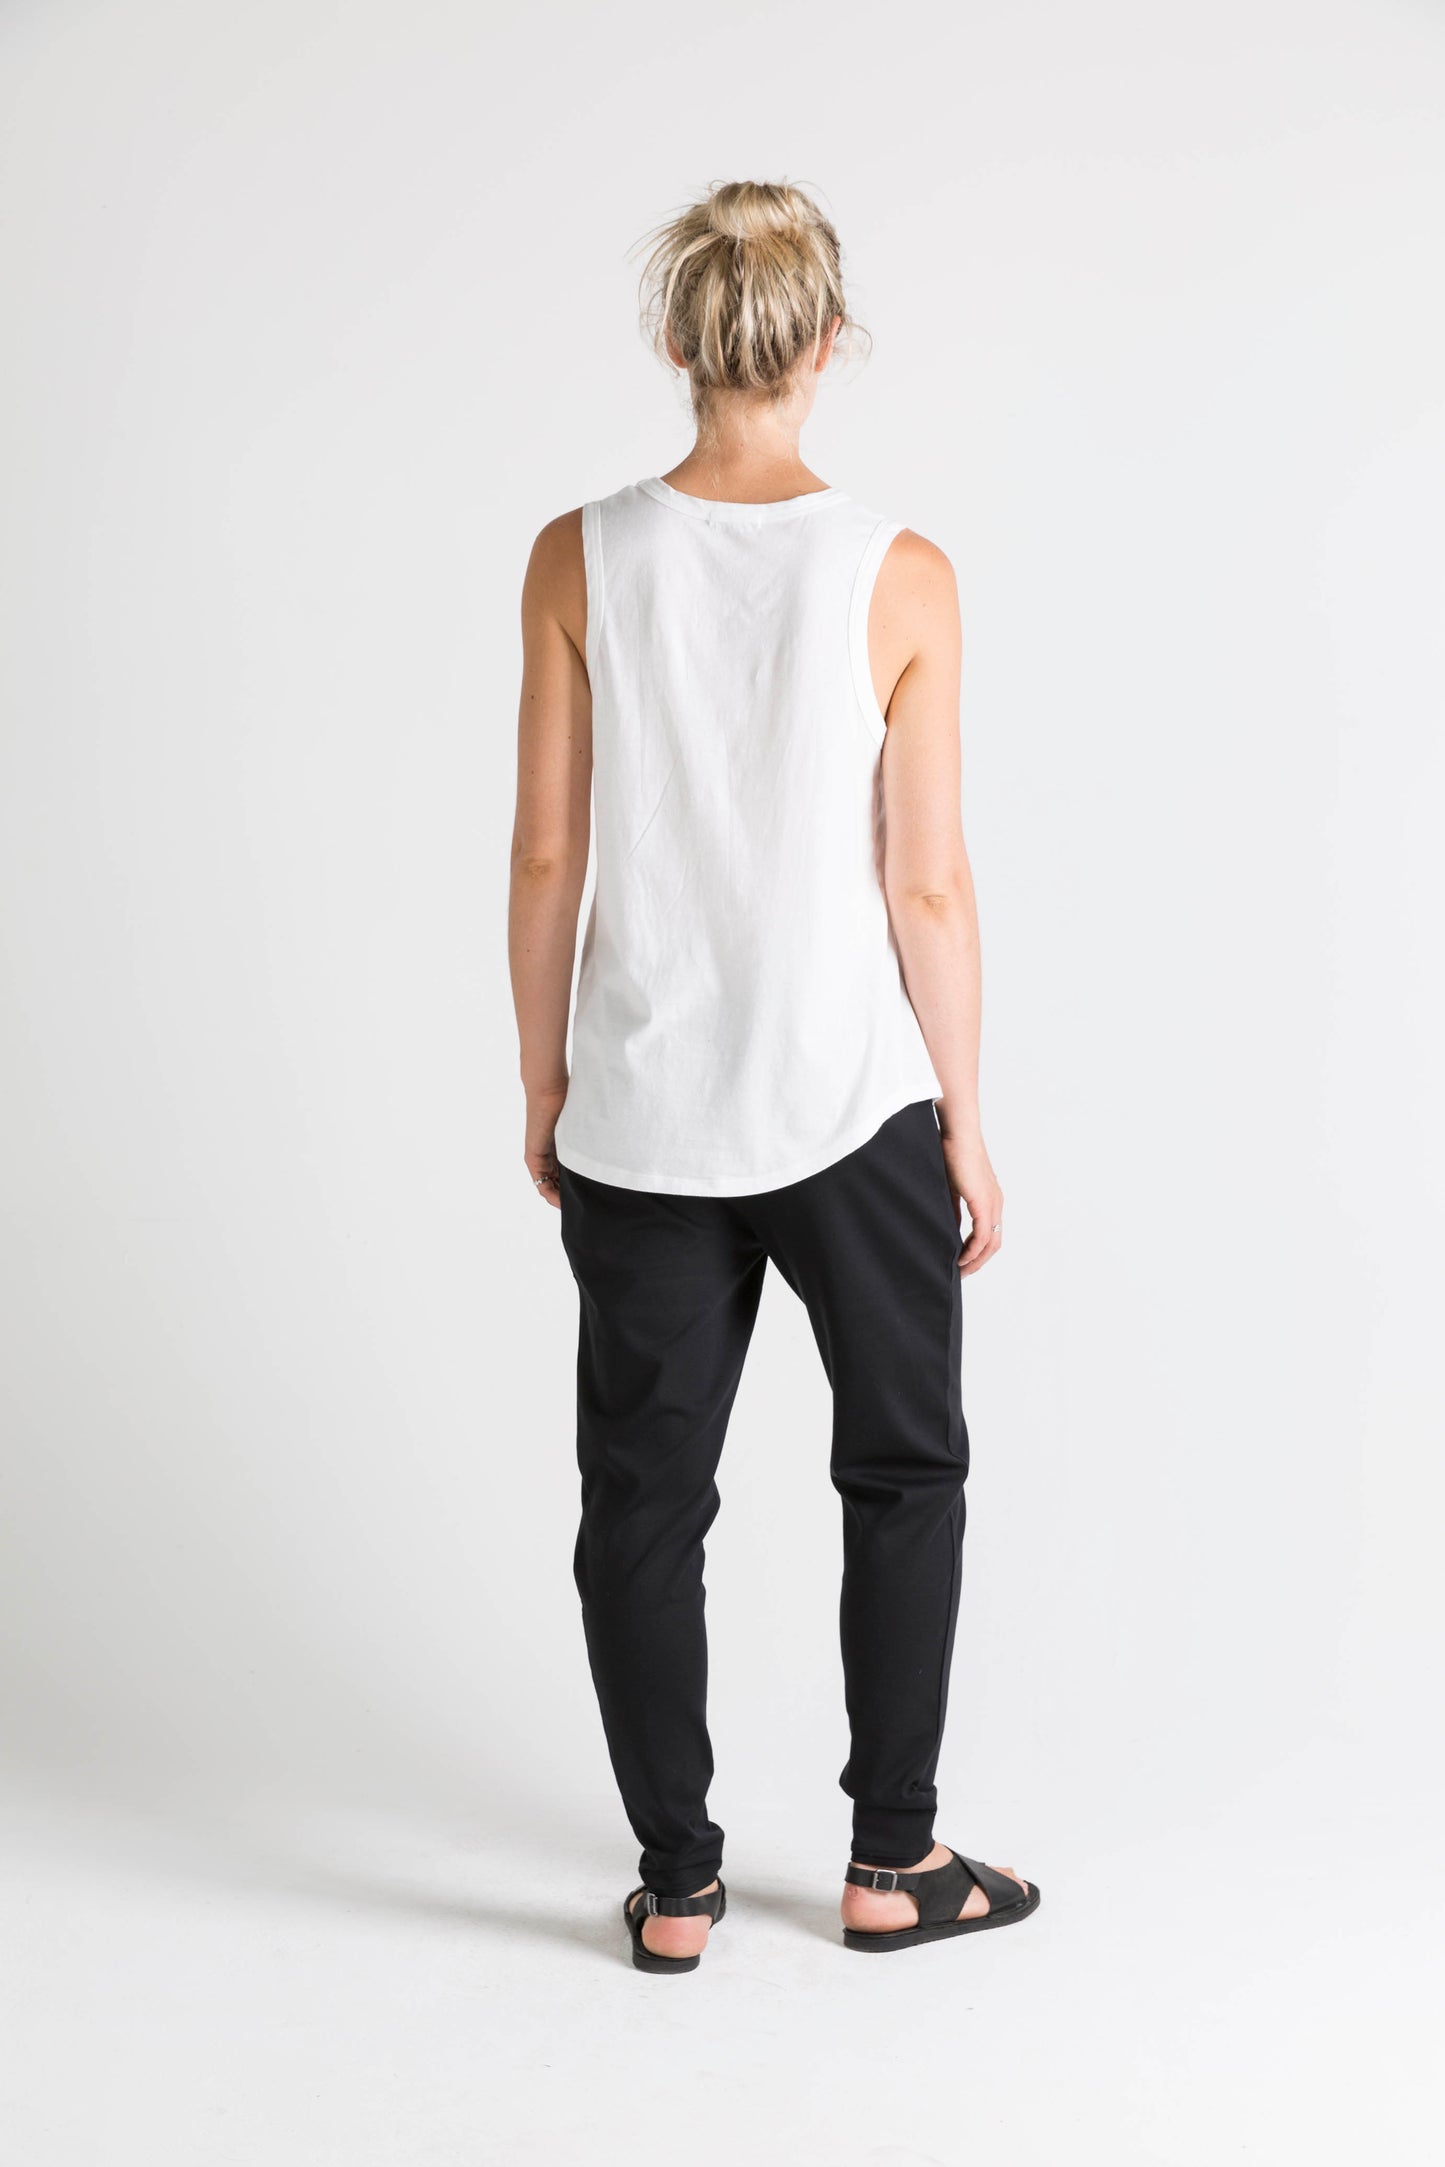 Ophelia and Ryder Scoop Neck Tank Top